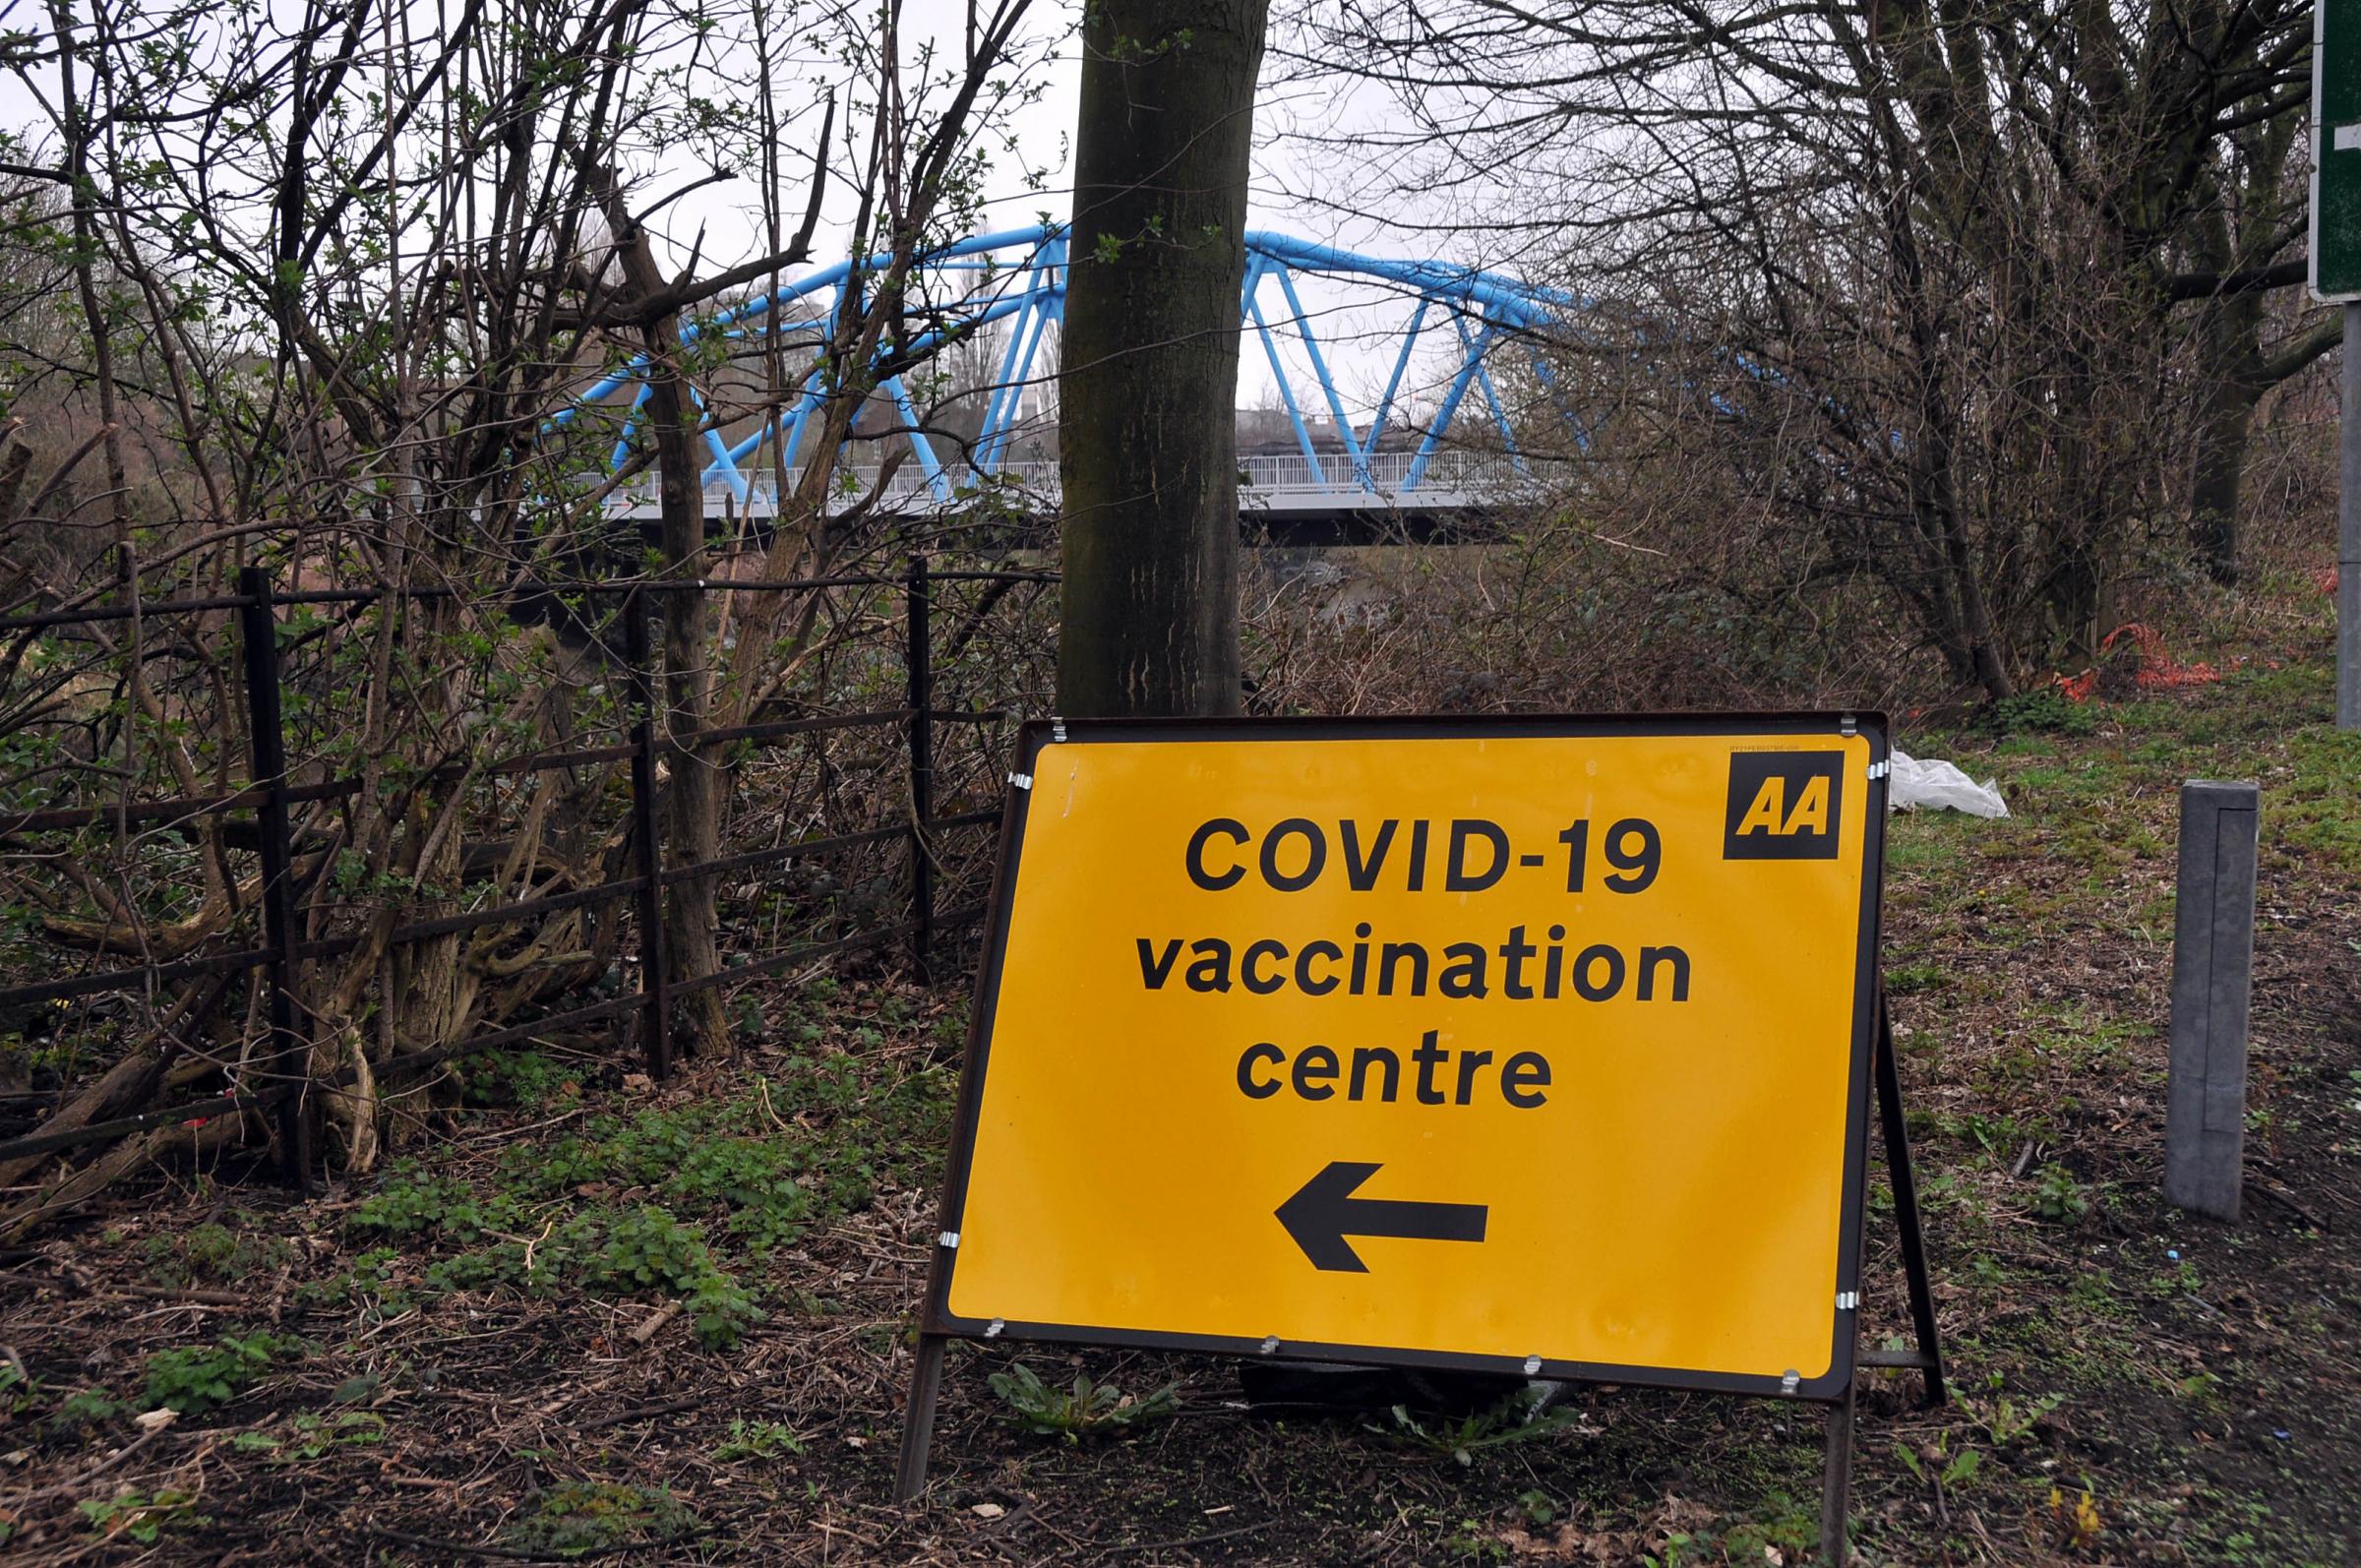 The progress of Covid vaccination in Warrington and ages currently eligible for jabs